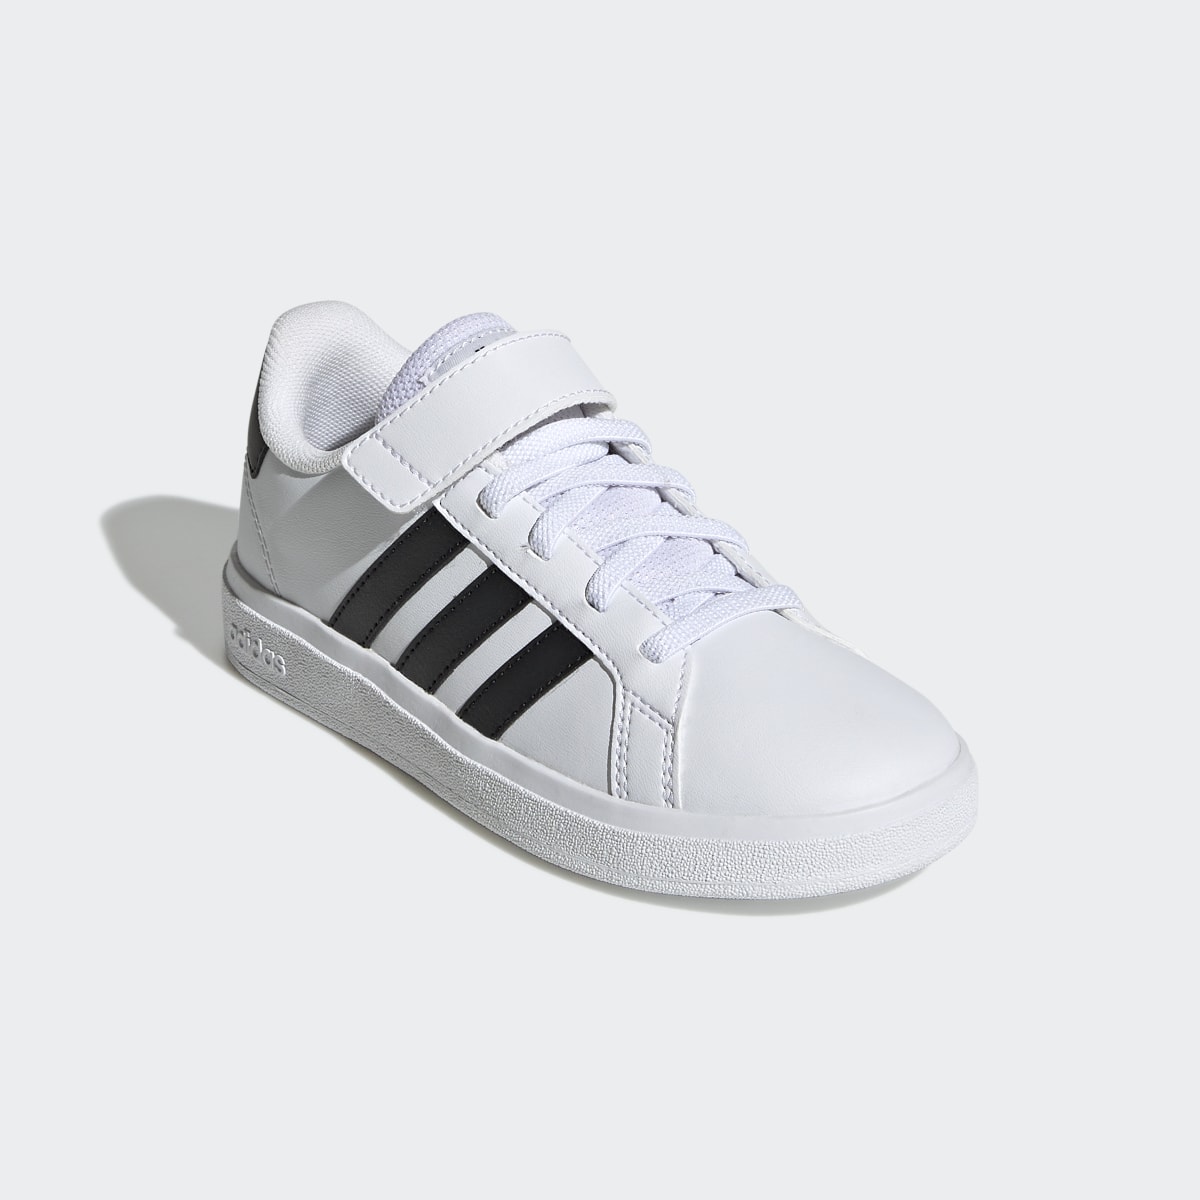 Adidas Grand Court Court Elastic Lace and Top Strap Shoes. 5